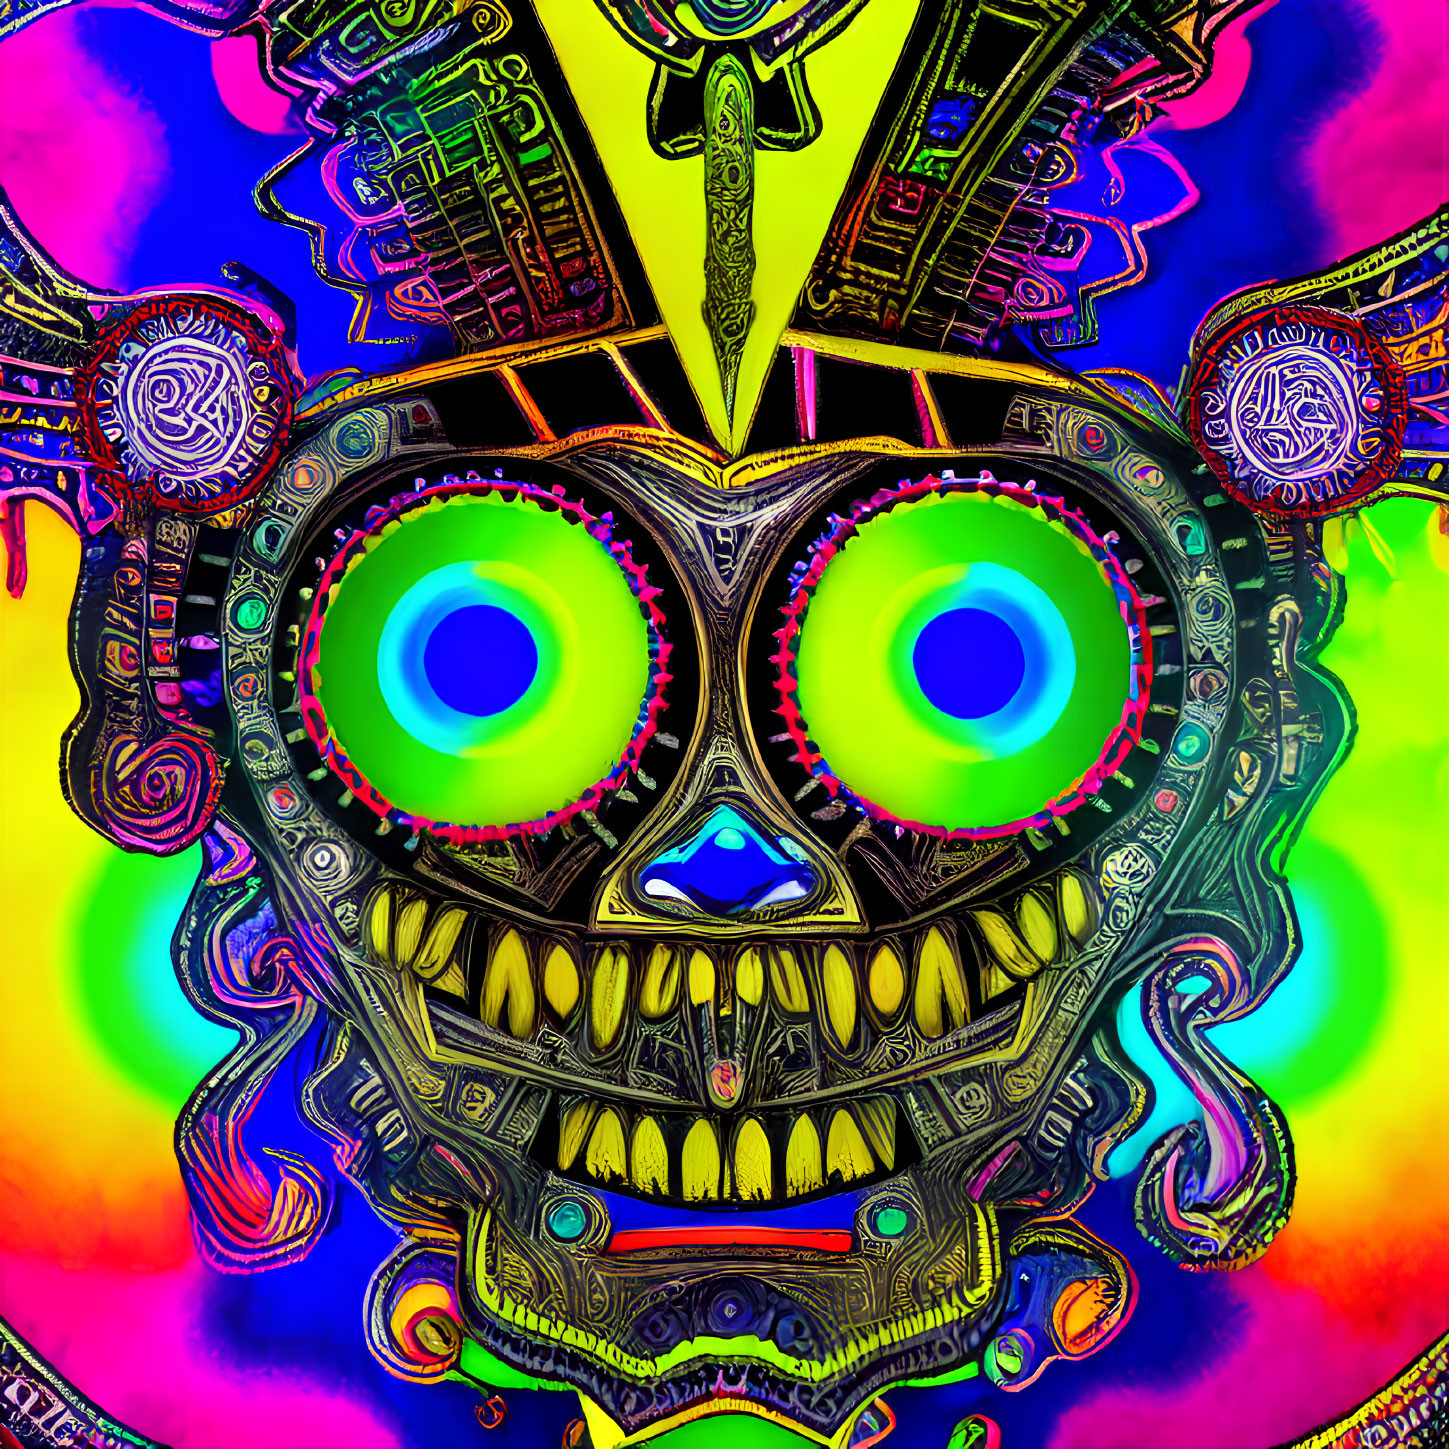 Vivid Psychedelic Skull Artwork with Aztec Patterns on Colorful Background